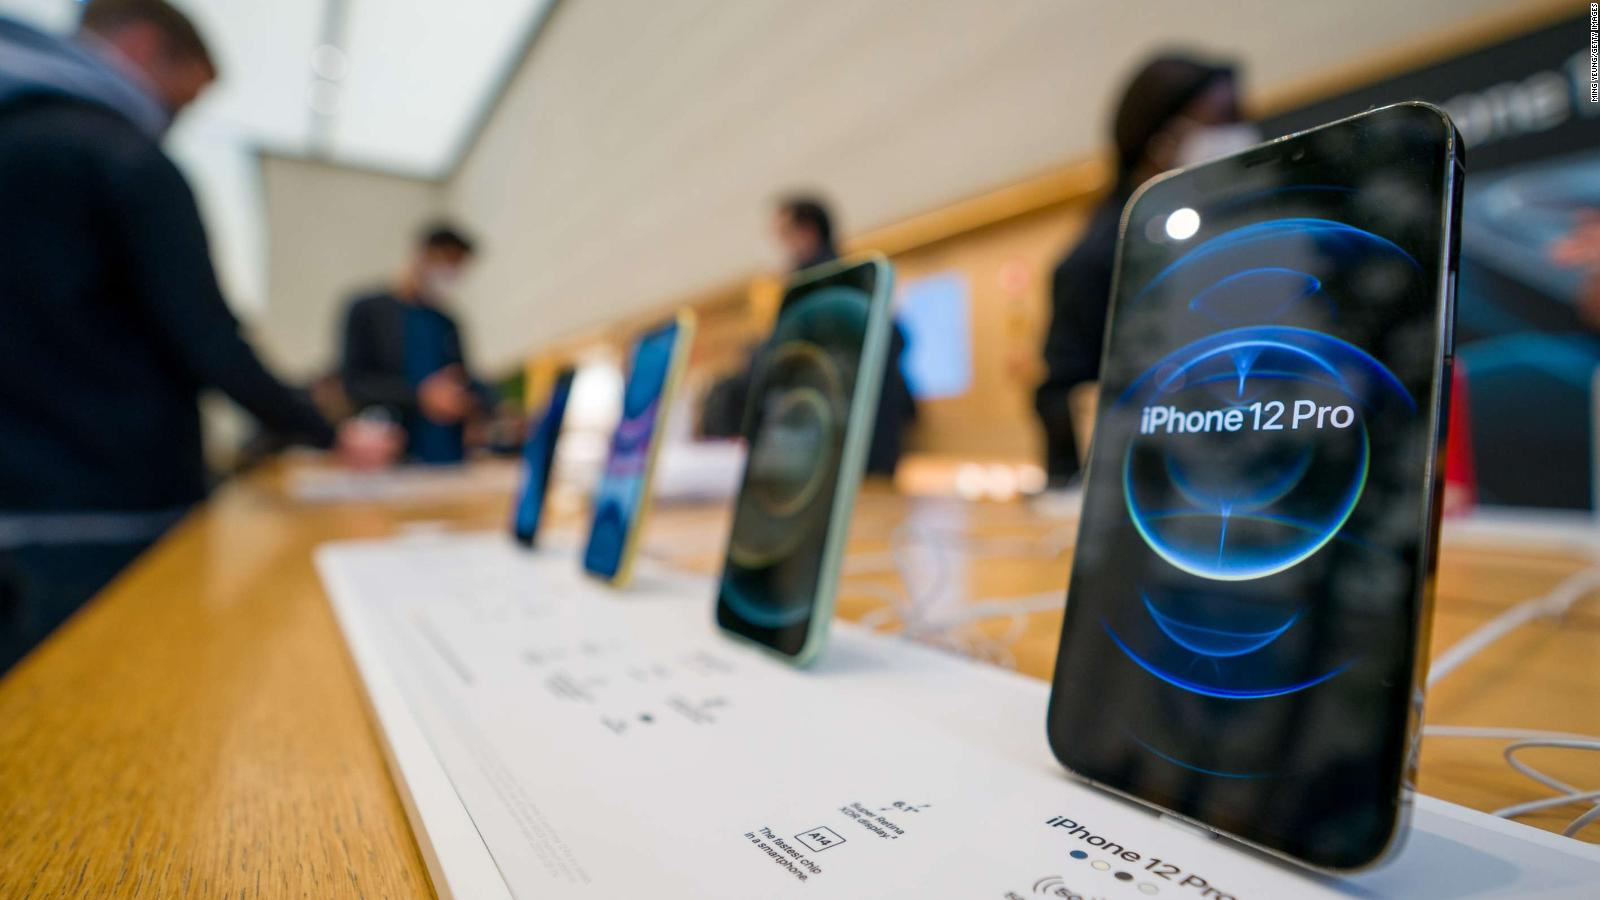 Apple defeated Samsung as a phone maker